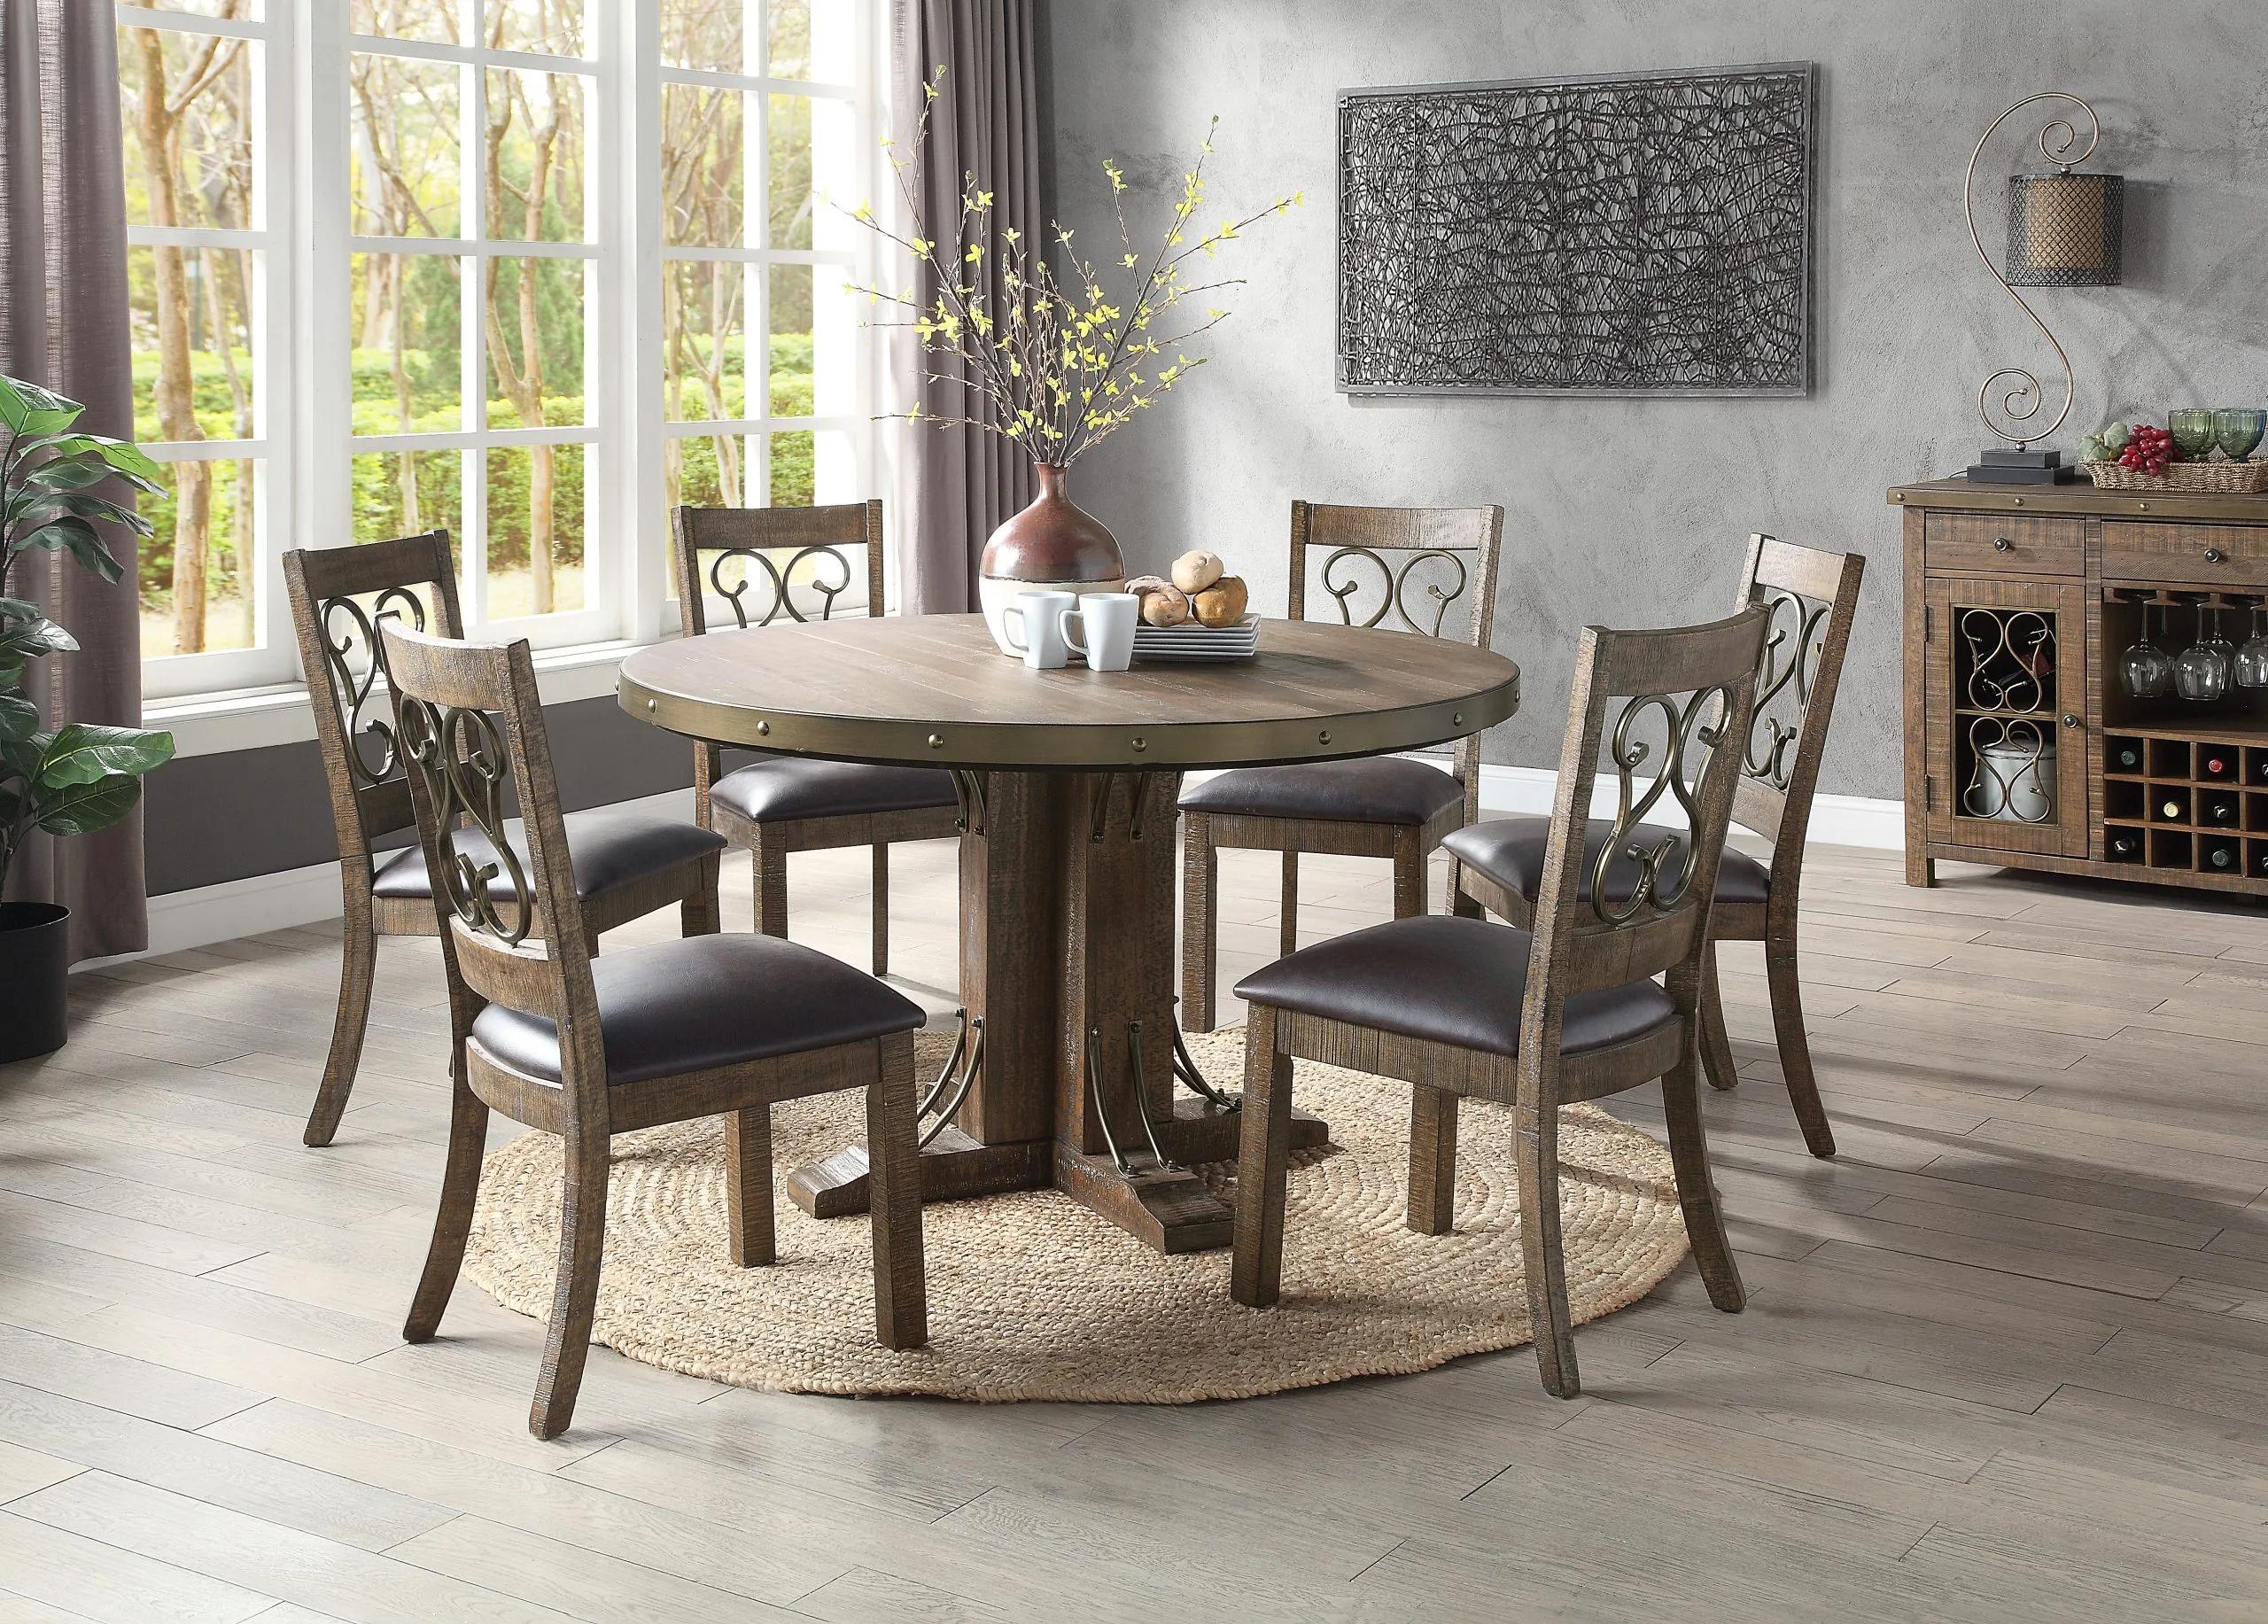 

    
Farmhouse Weathered Cherry Round Dining Table by Acme DN00984-7pcs Raphaela
